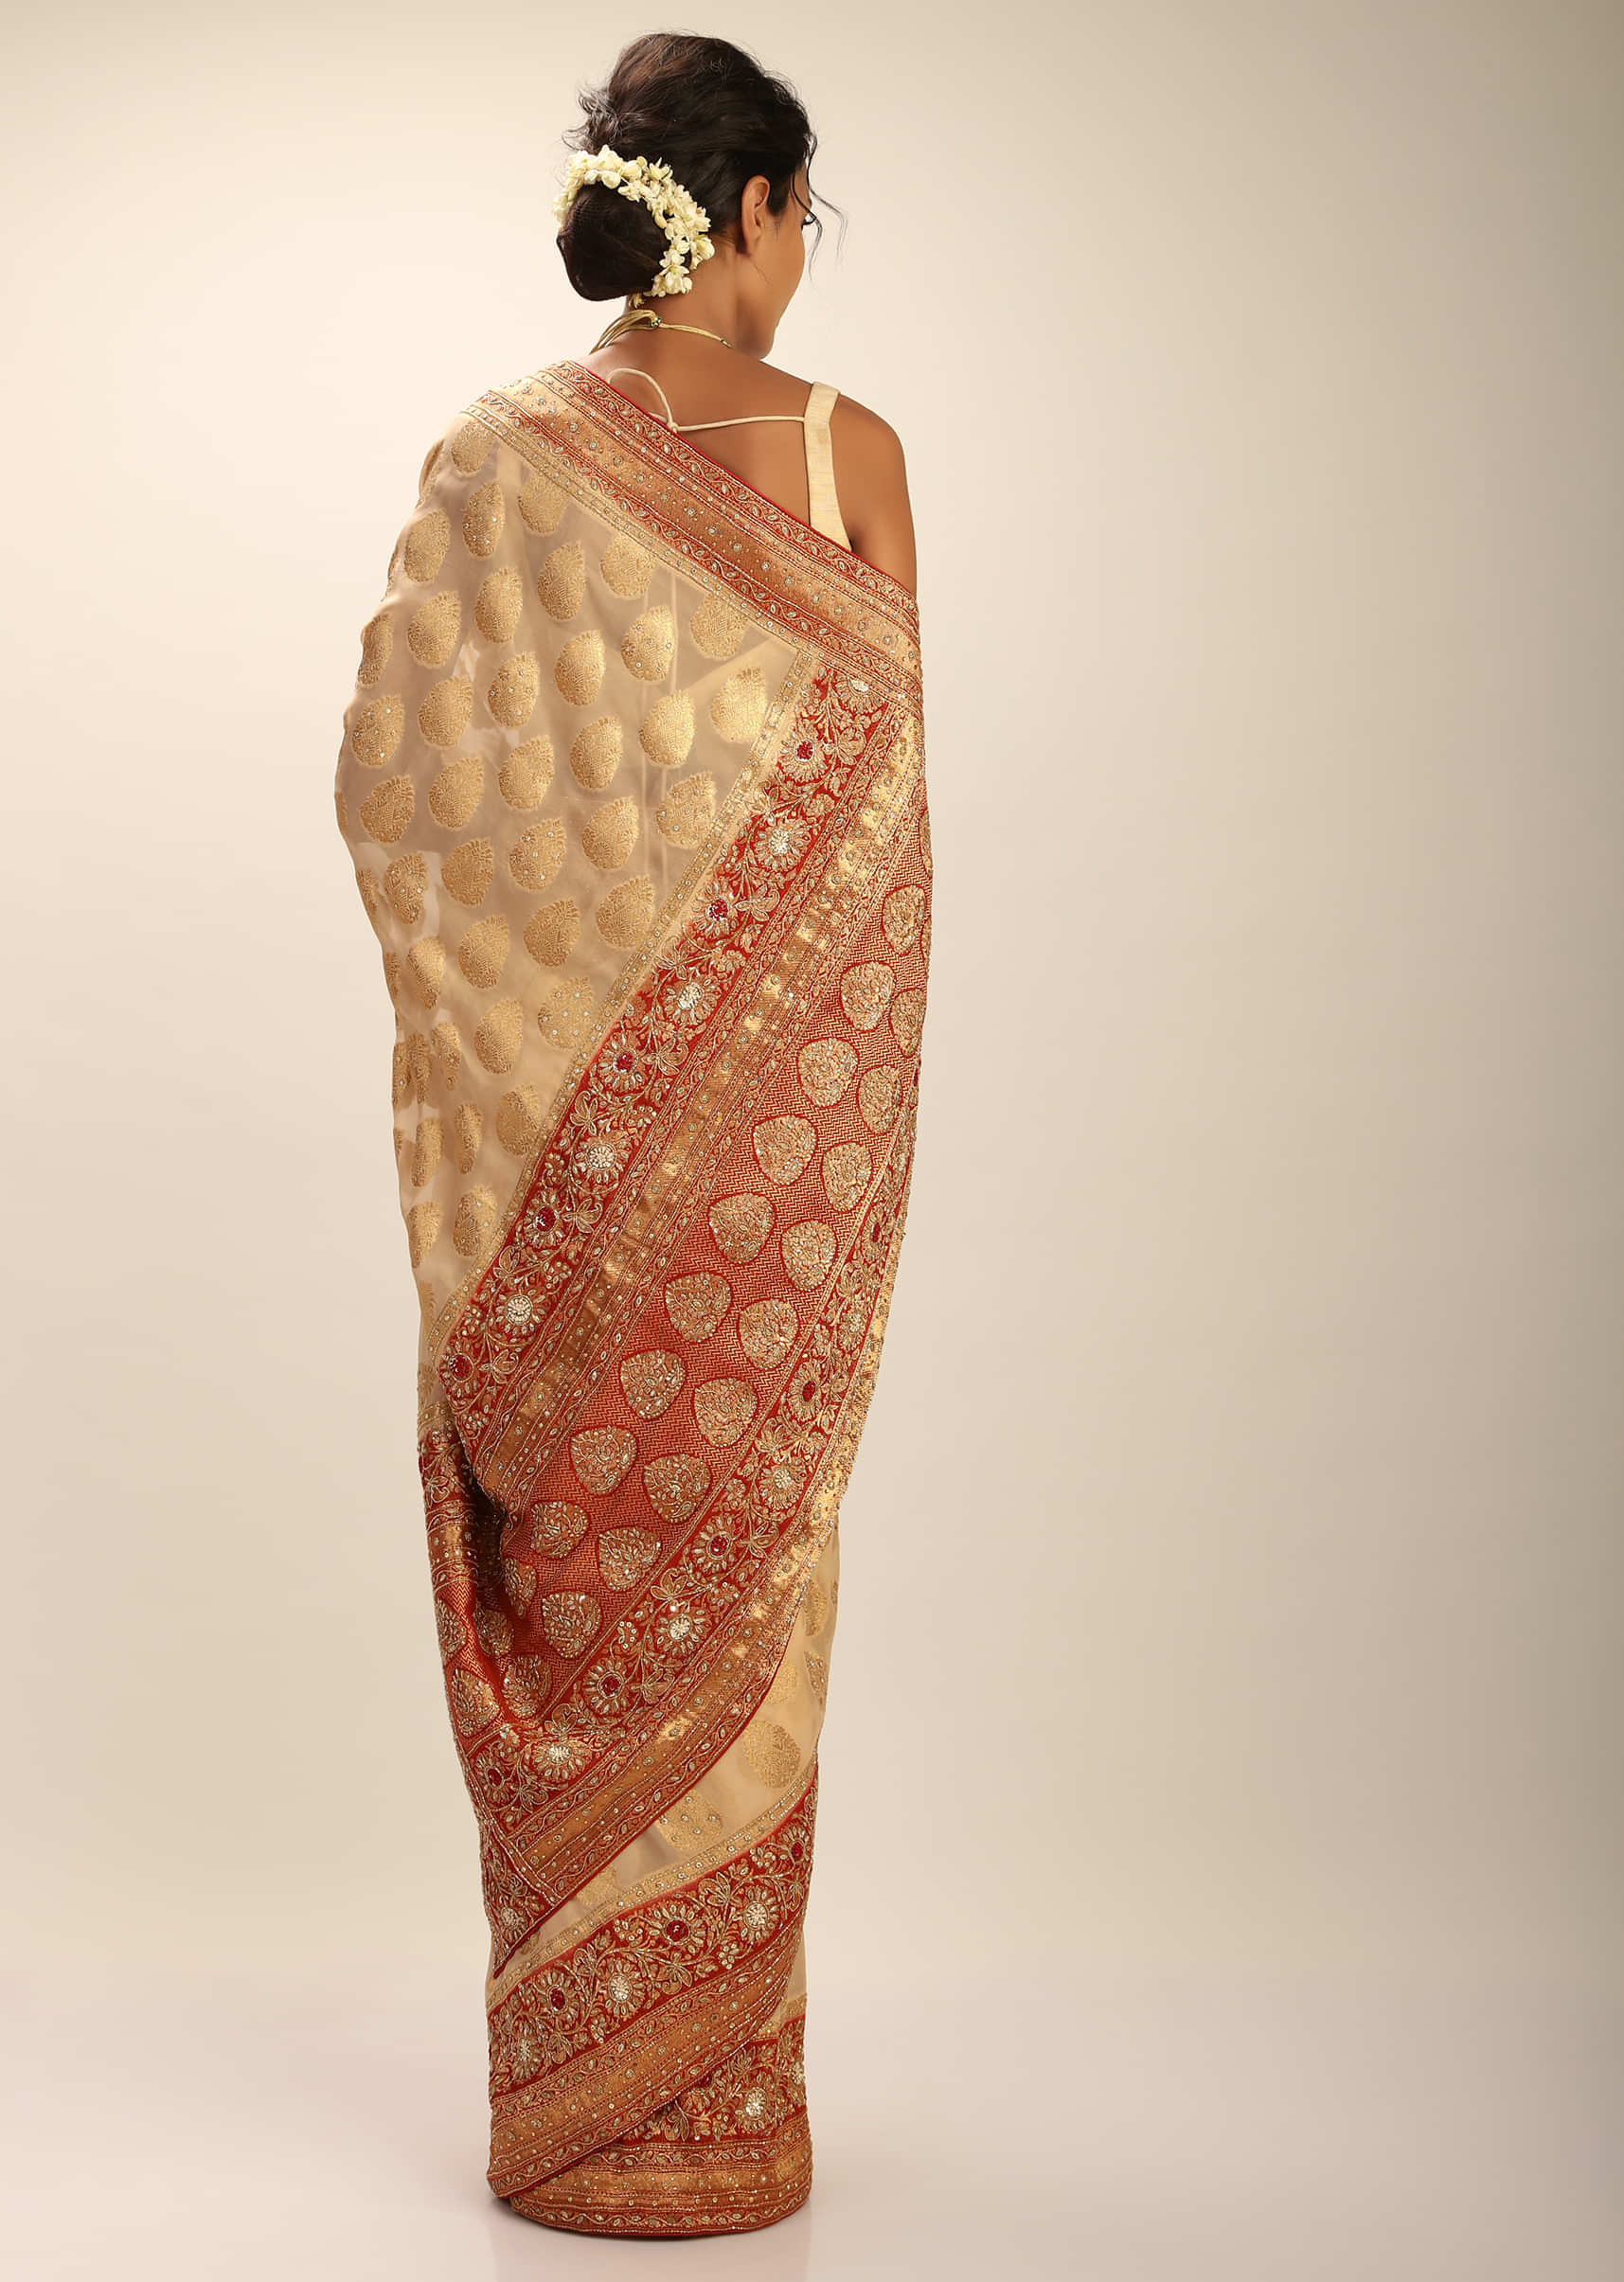 Cream Banarasi Saree In Georgette With Woven Buttis And Zardosi Embroidery Detailing 